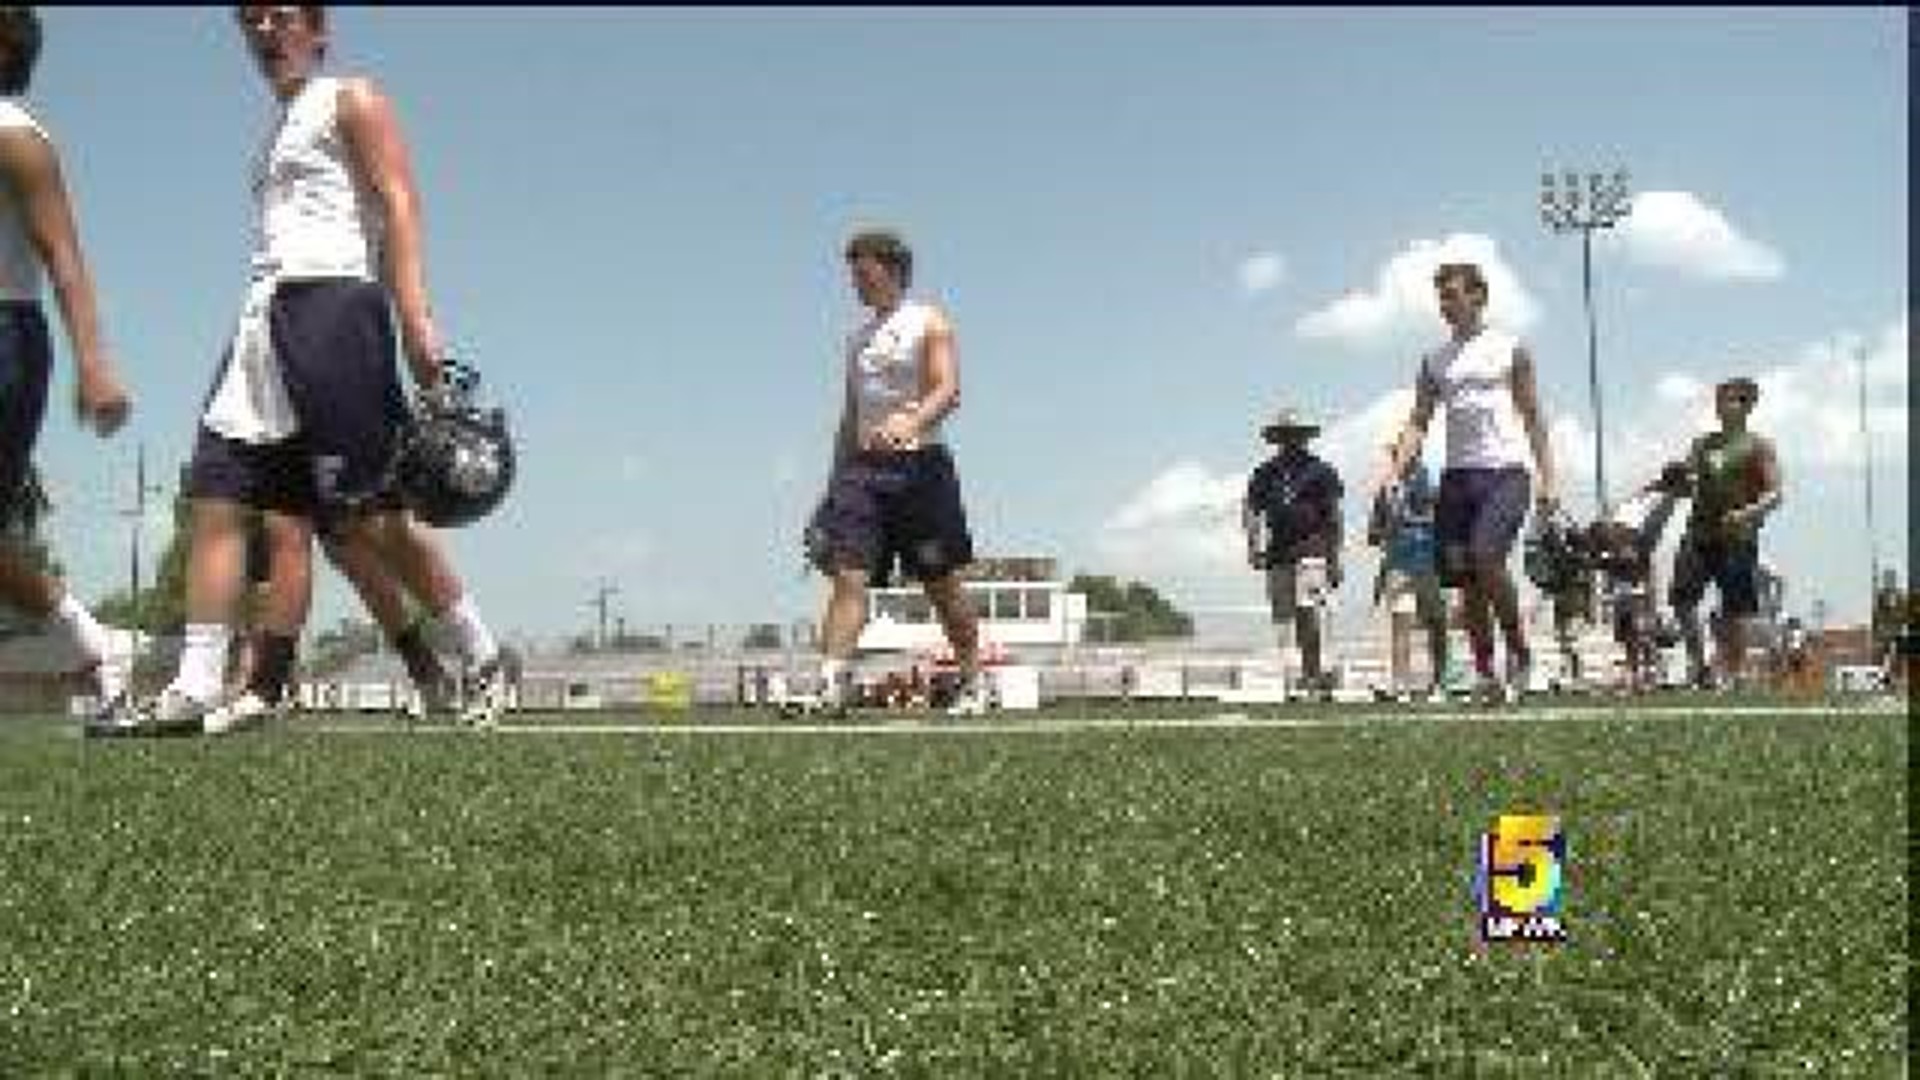 Players And Parents Try To Beat The Heat At 7-On-7 Tournament